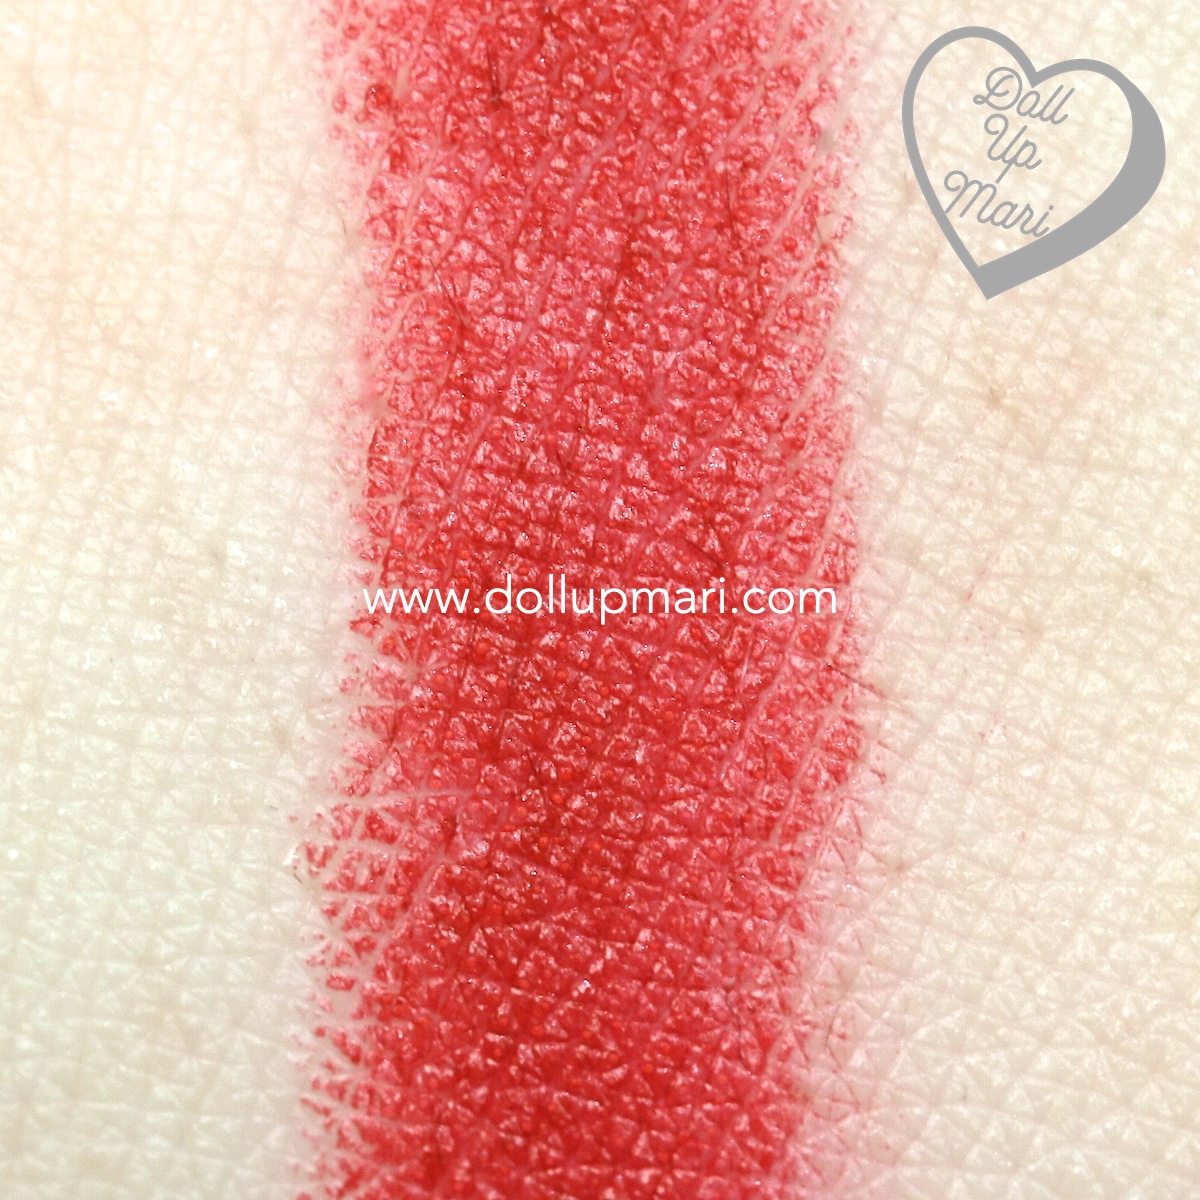 Swatch of red side of BLK Cosmetics K-Beauty K-Drama All-Day Intense Matte Lipstick in the shade of Dandelion